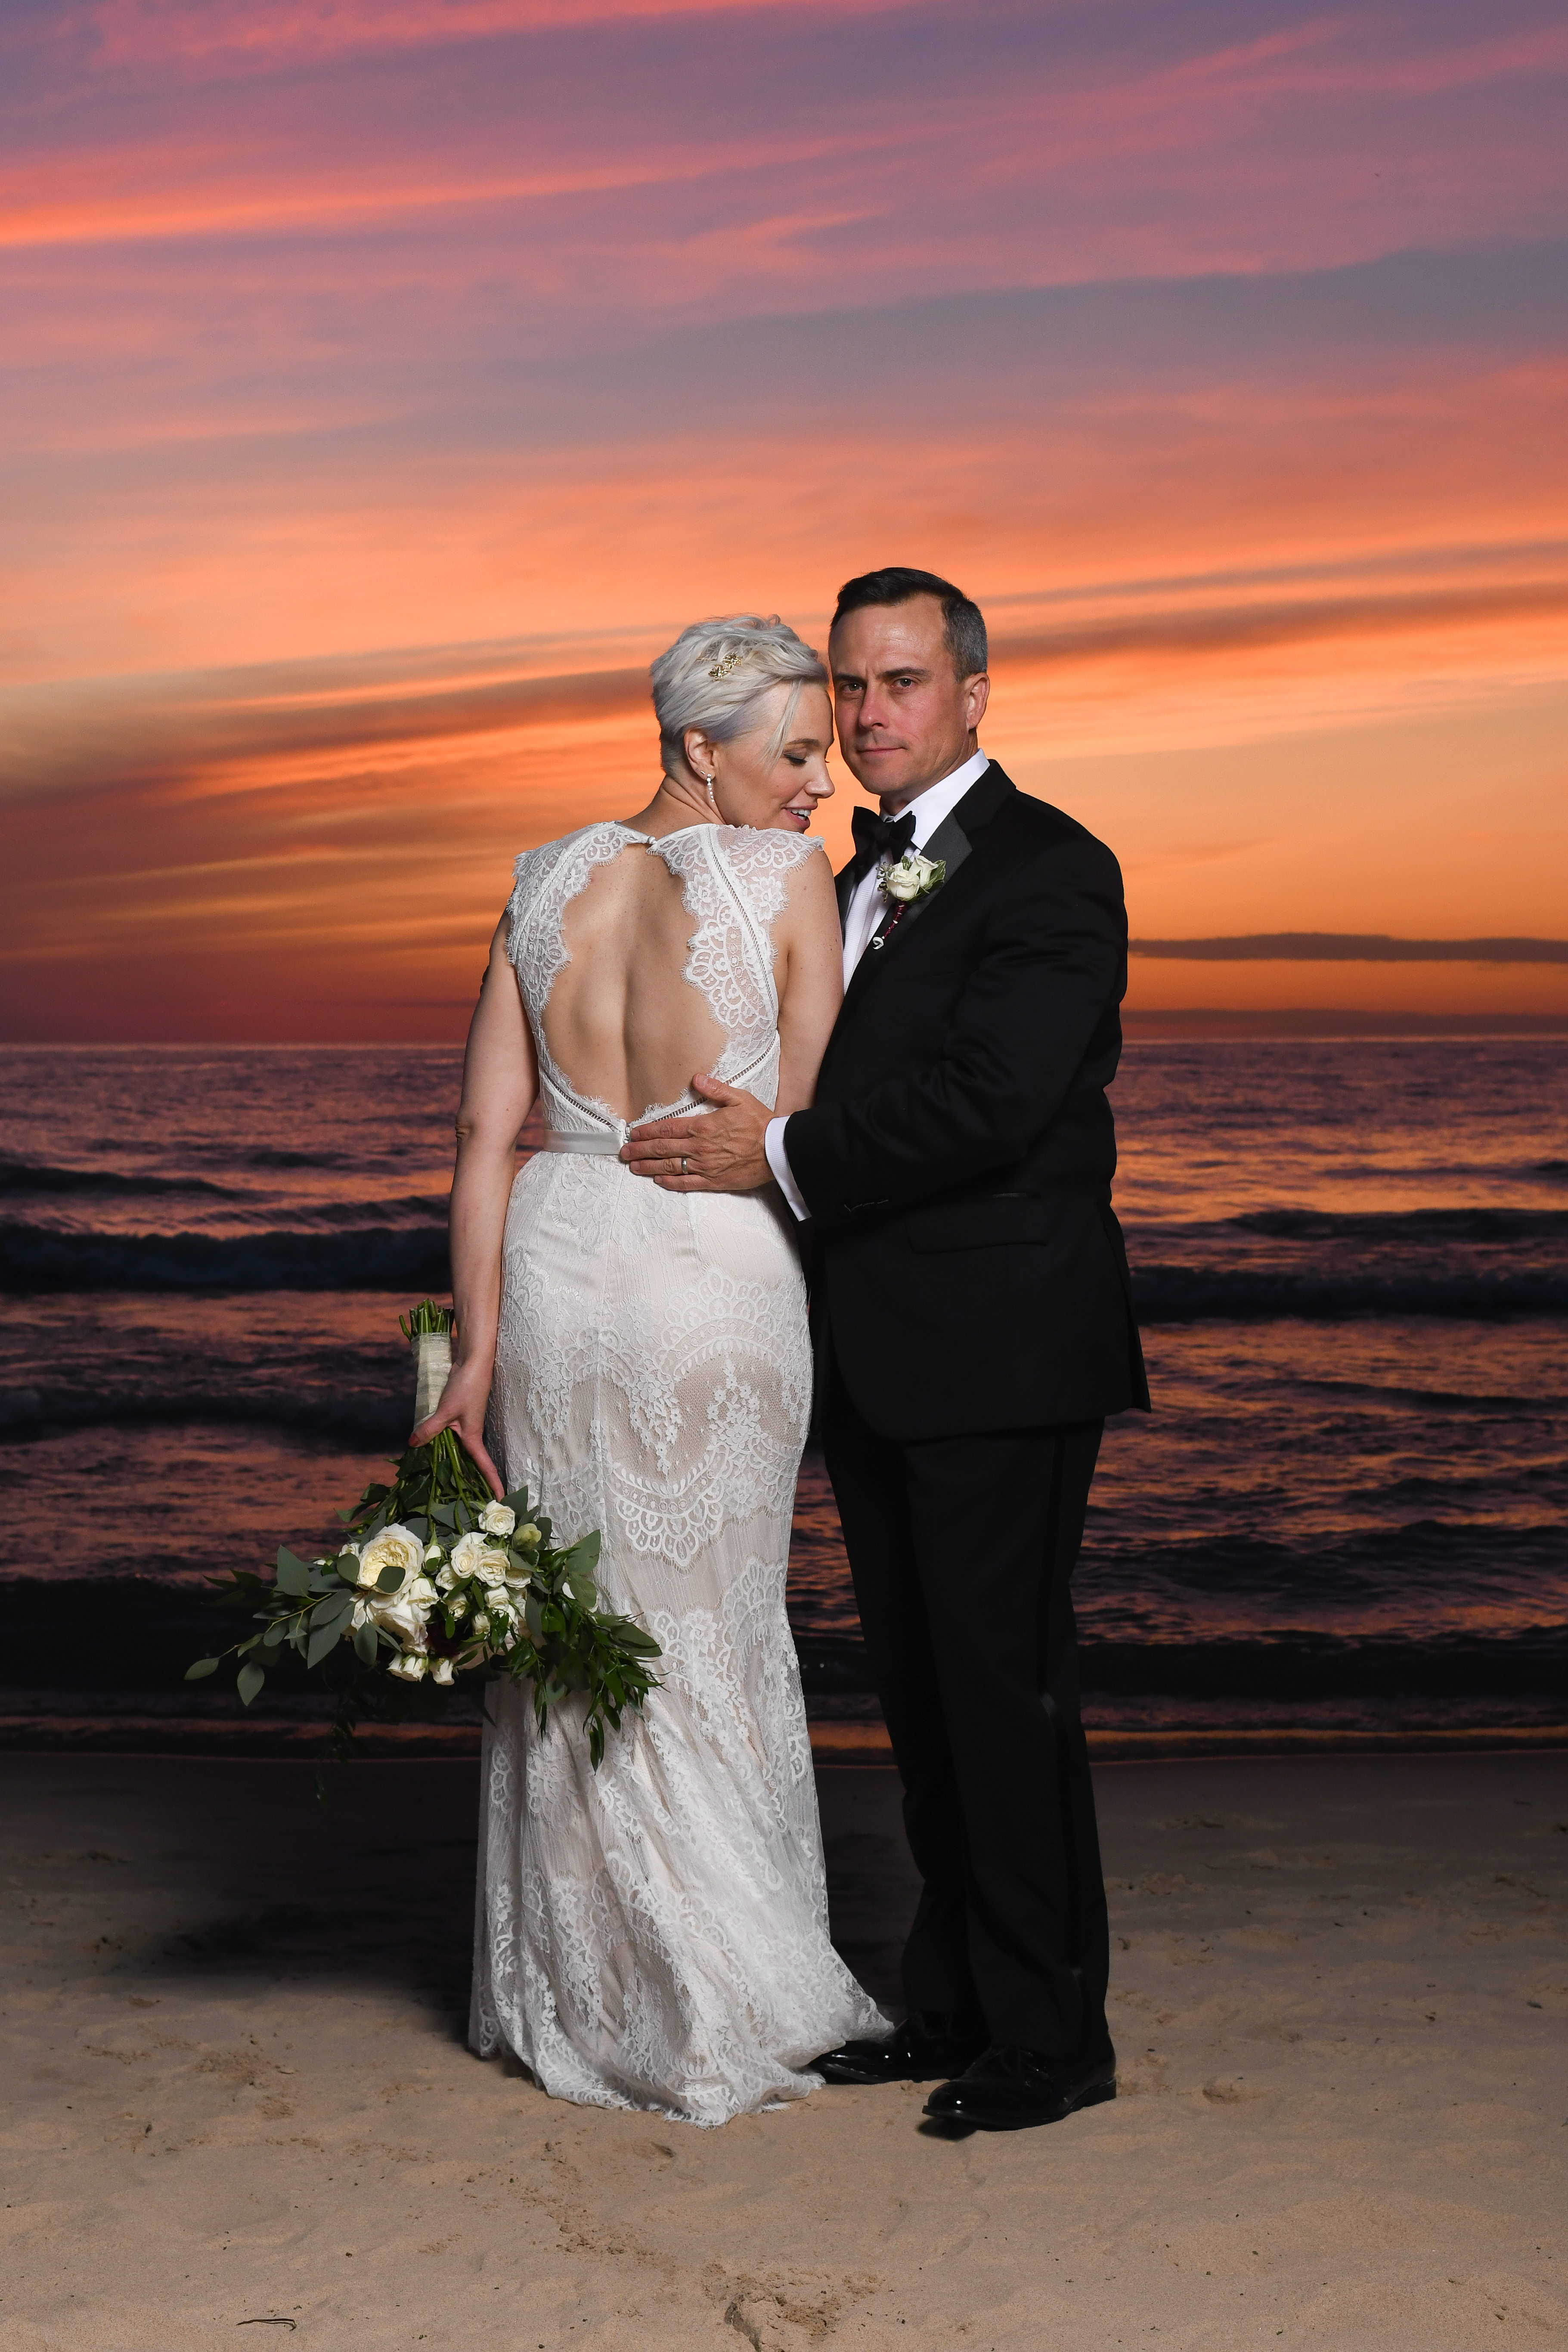 sumer elopement, elope in South Haven on the beach, bride and groom on beach at sunset